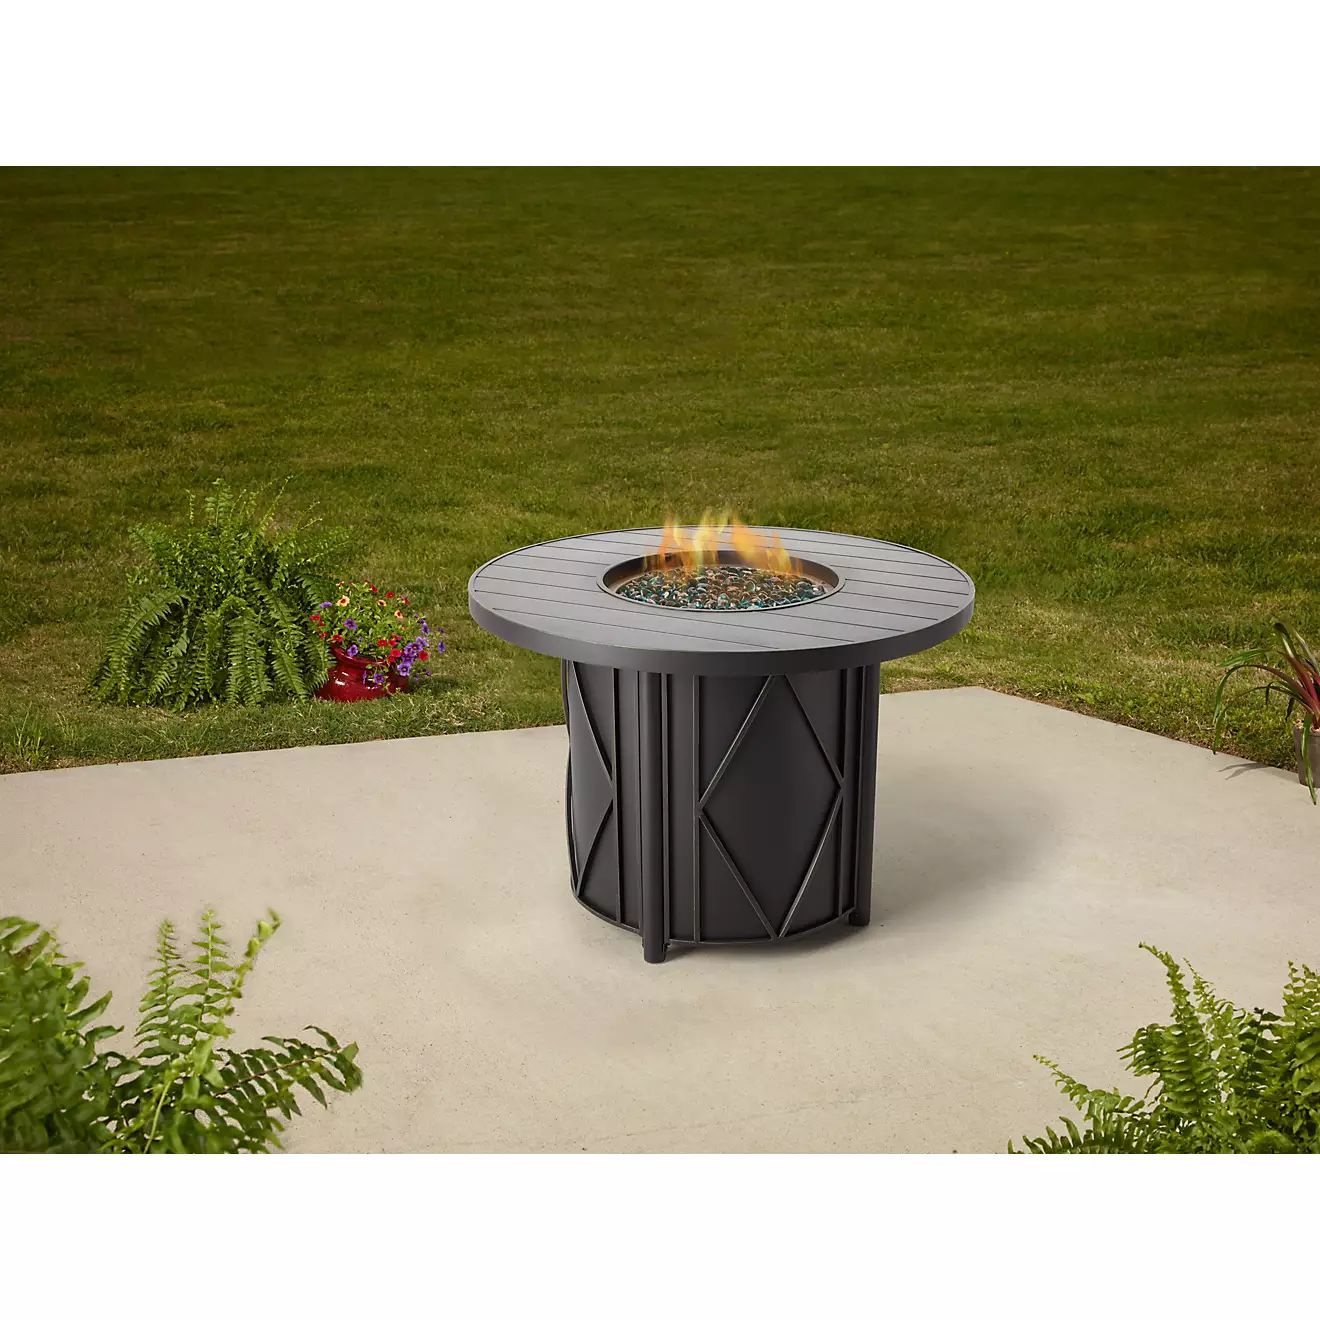 Mosaic Kingsland Round Top Gas Fire Pit | Academy Sports + Outdoors